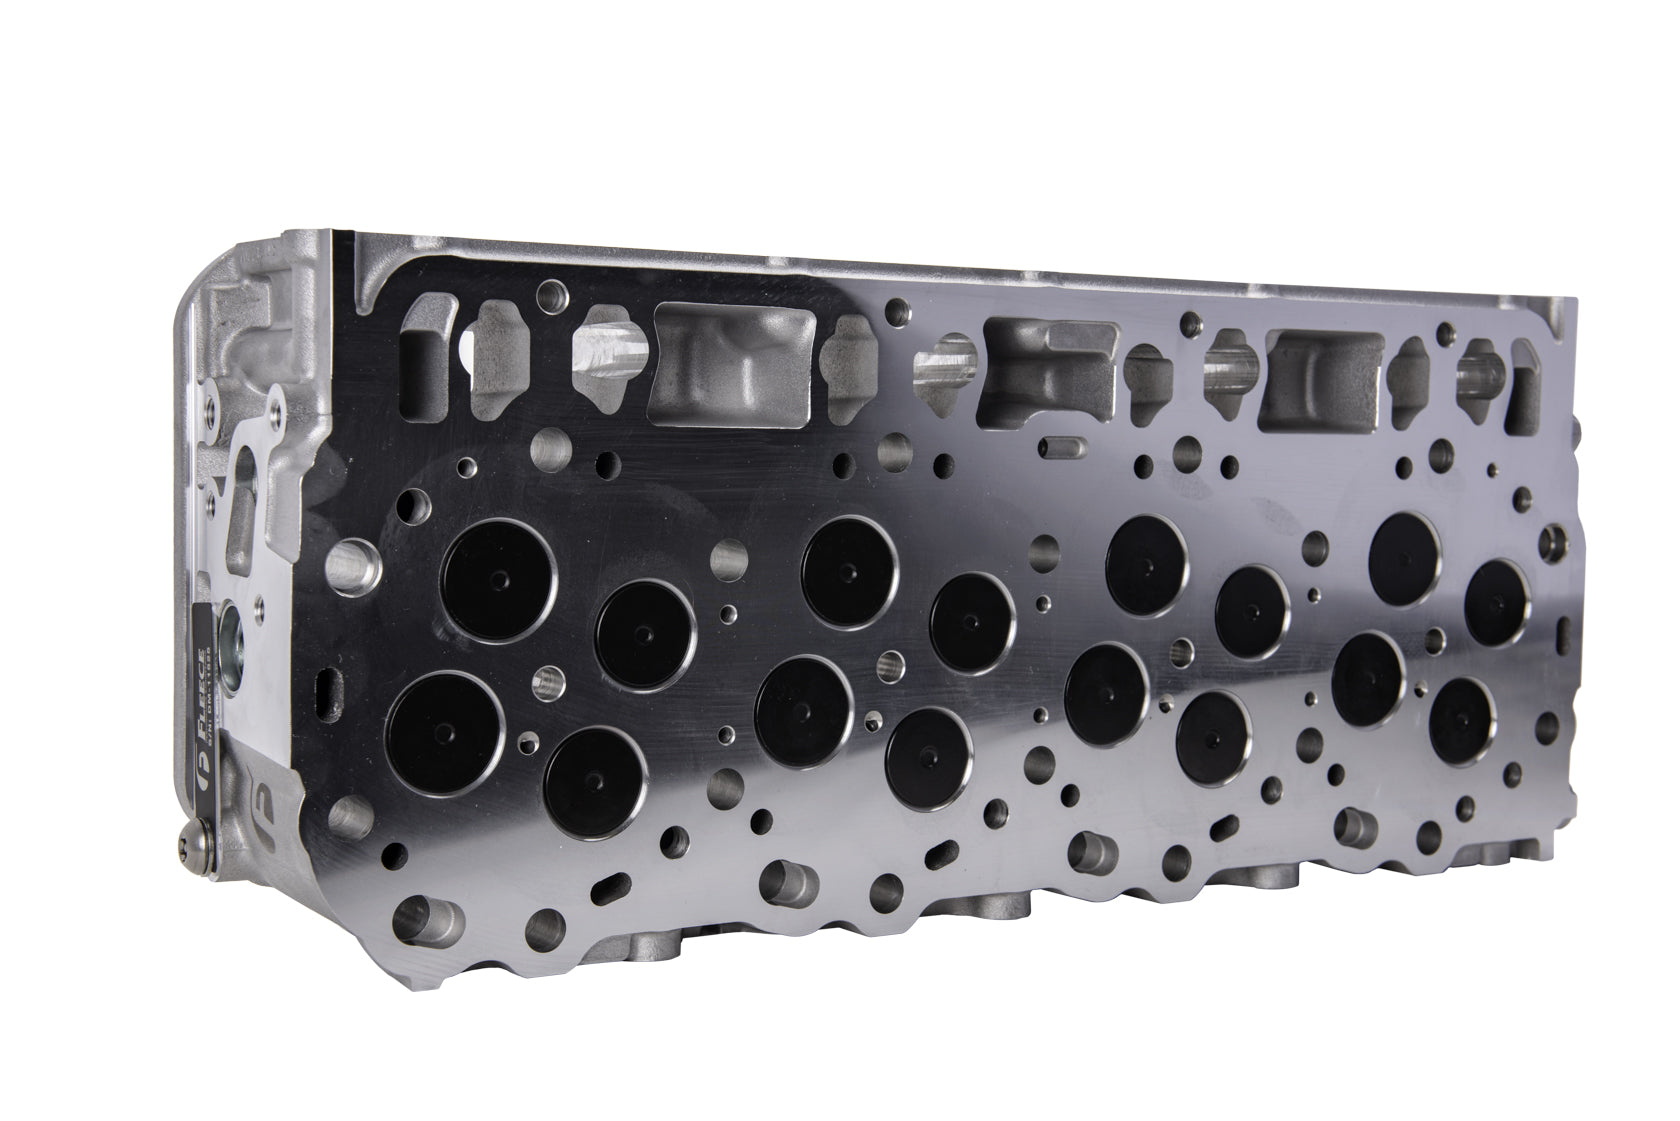 Fleece Performance Freedom Series Duramax Cylinder Head with Cupless Injector Bore for 2001-2004 LB7 (Driver Side) FPE-61-10001-D-CL